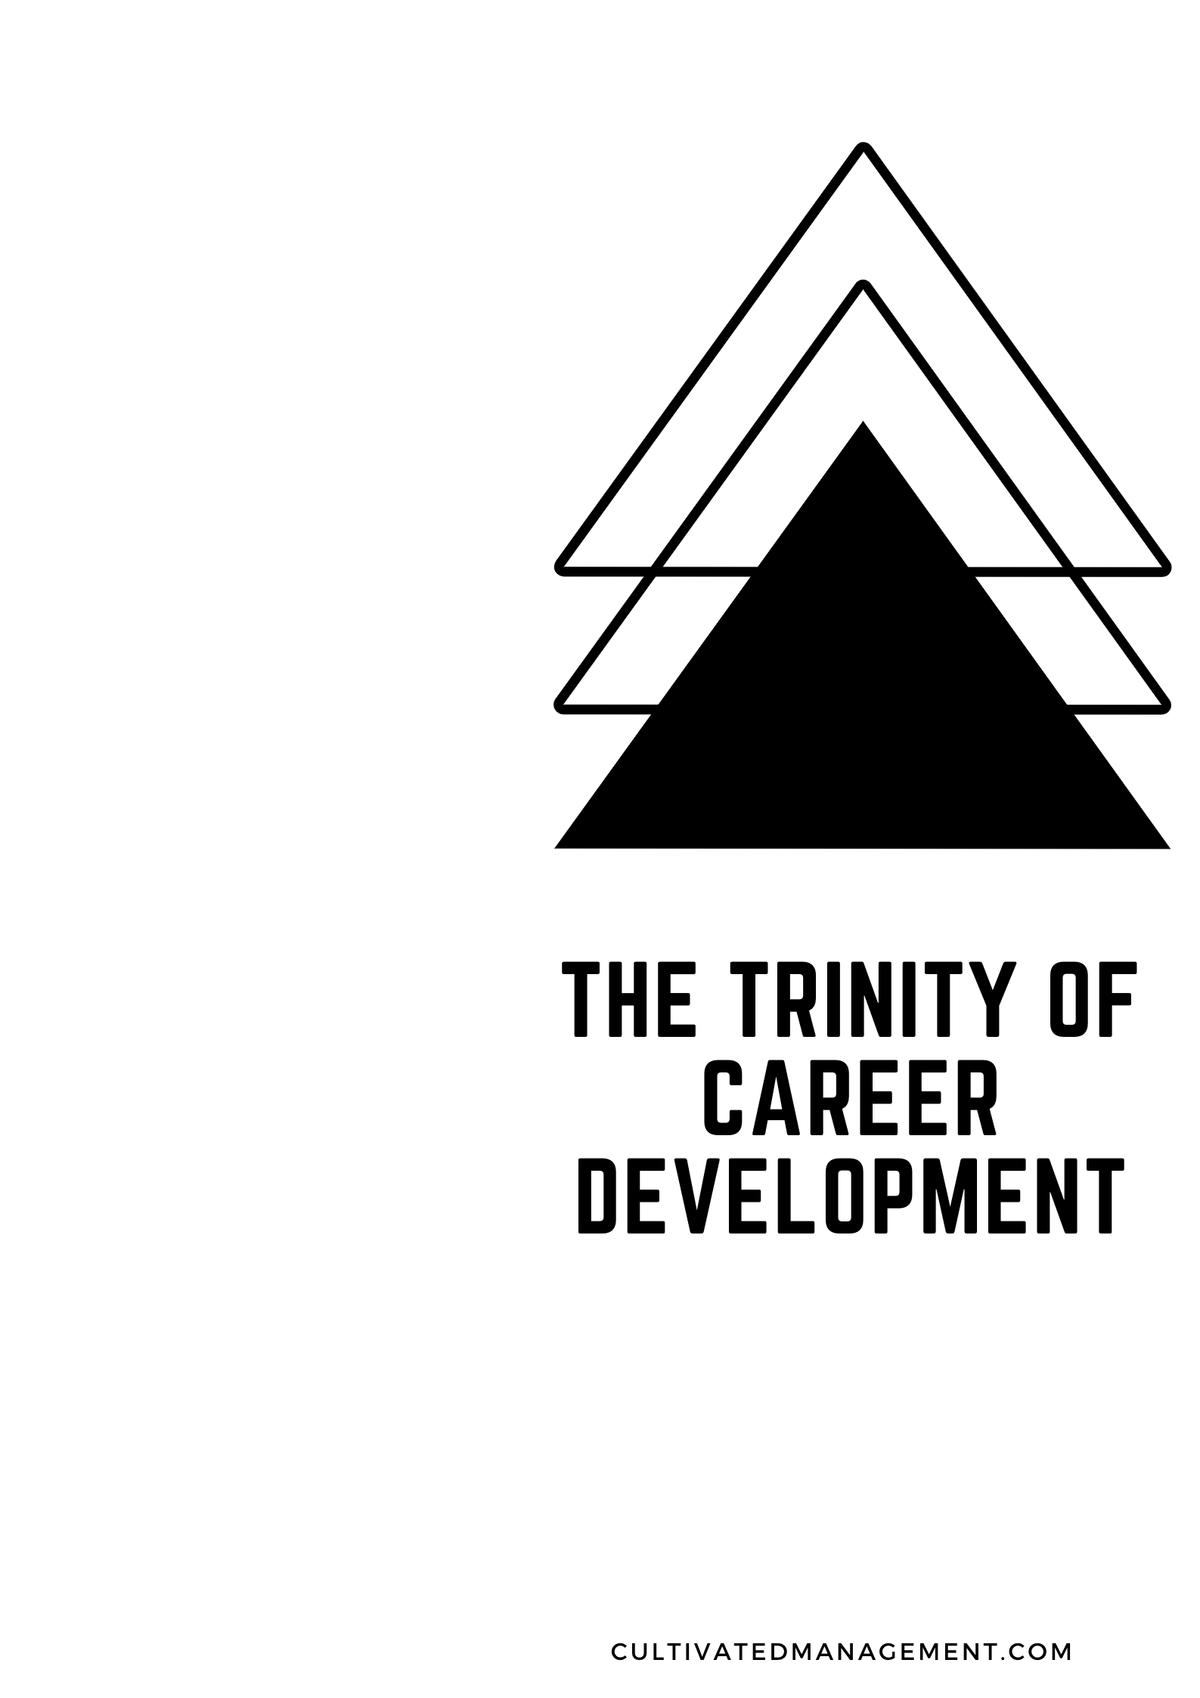 The Trinity of Career Development - a powerful way to understand yourself